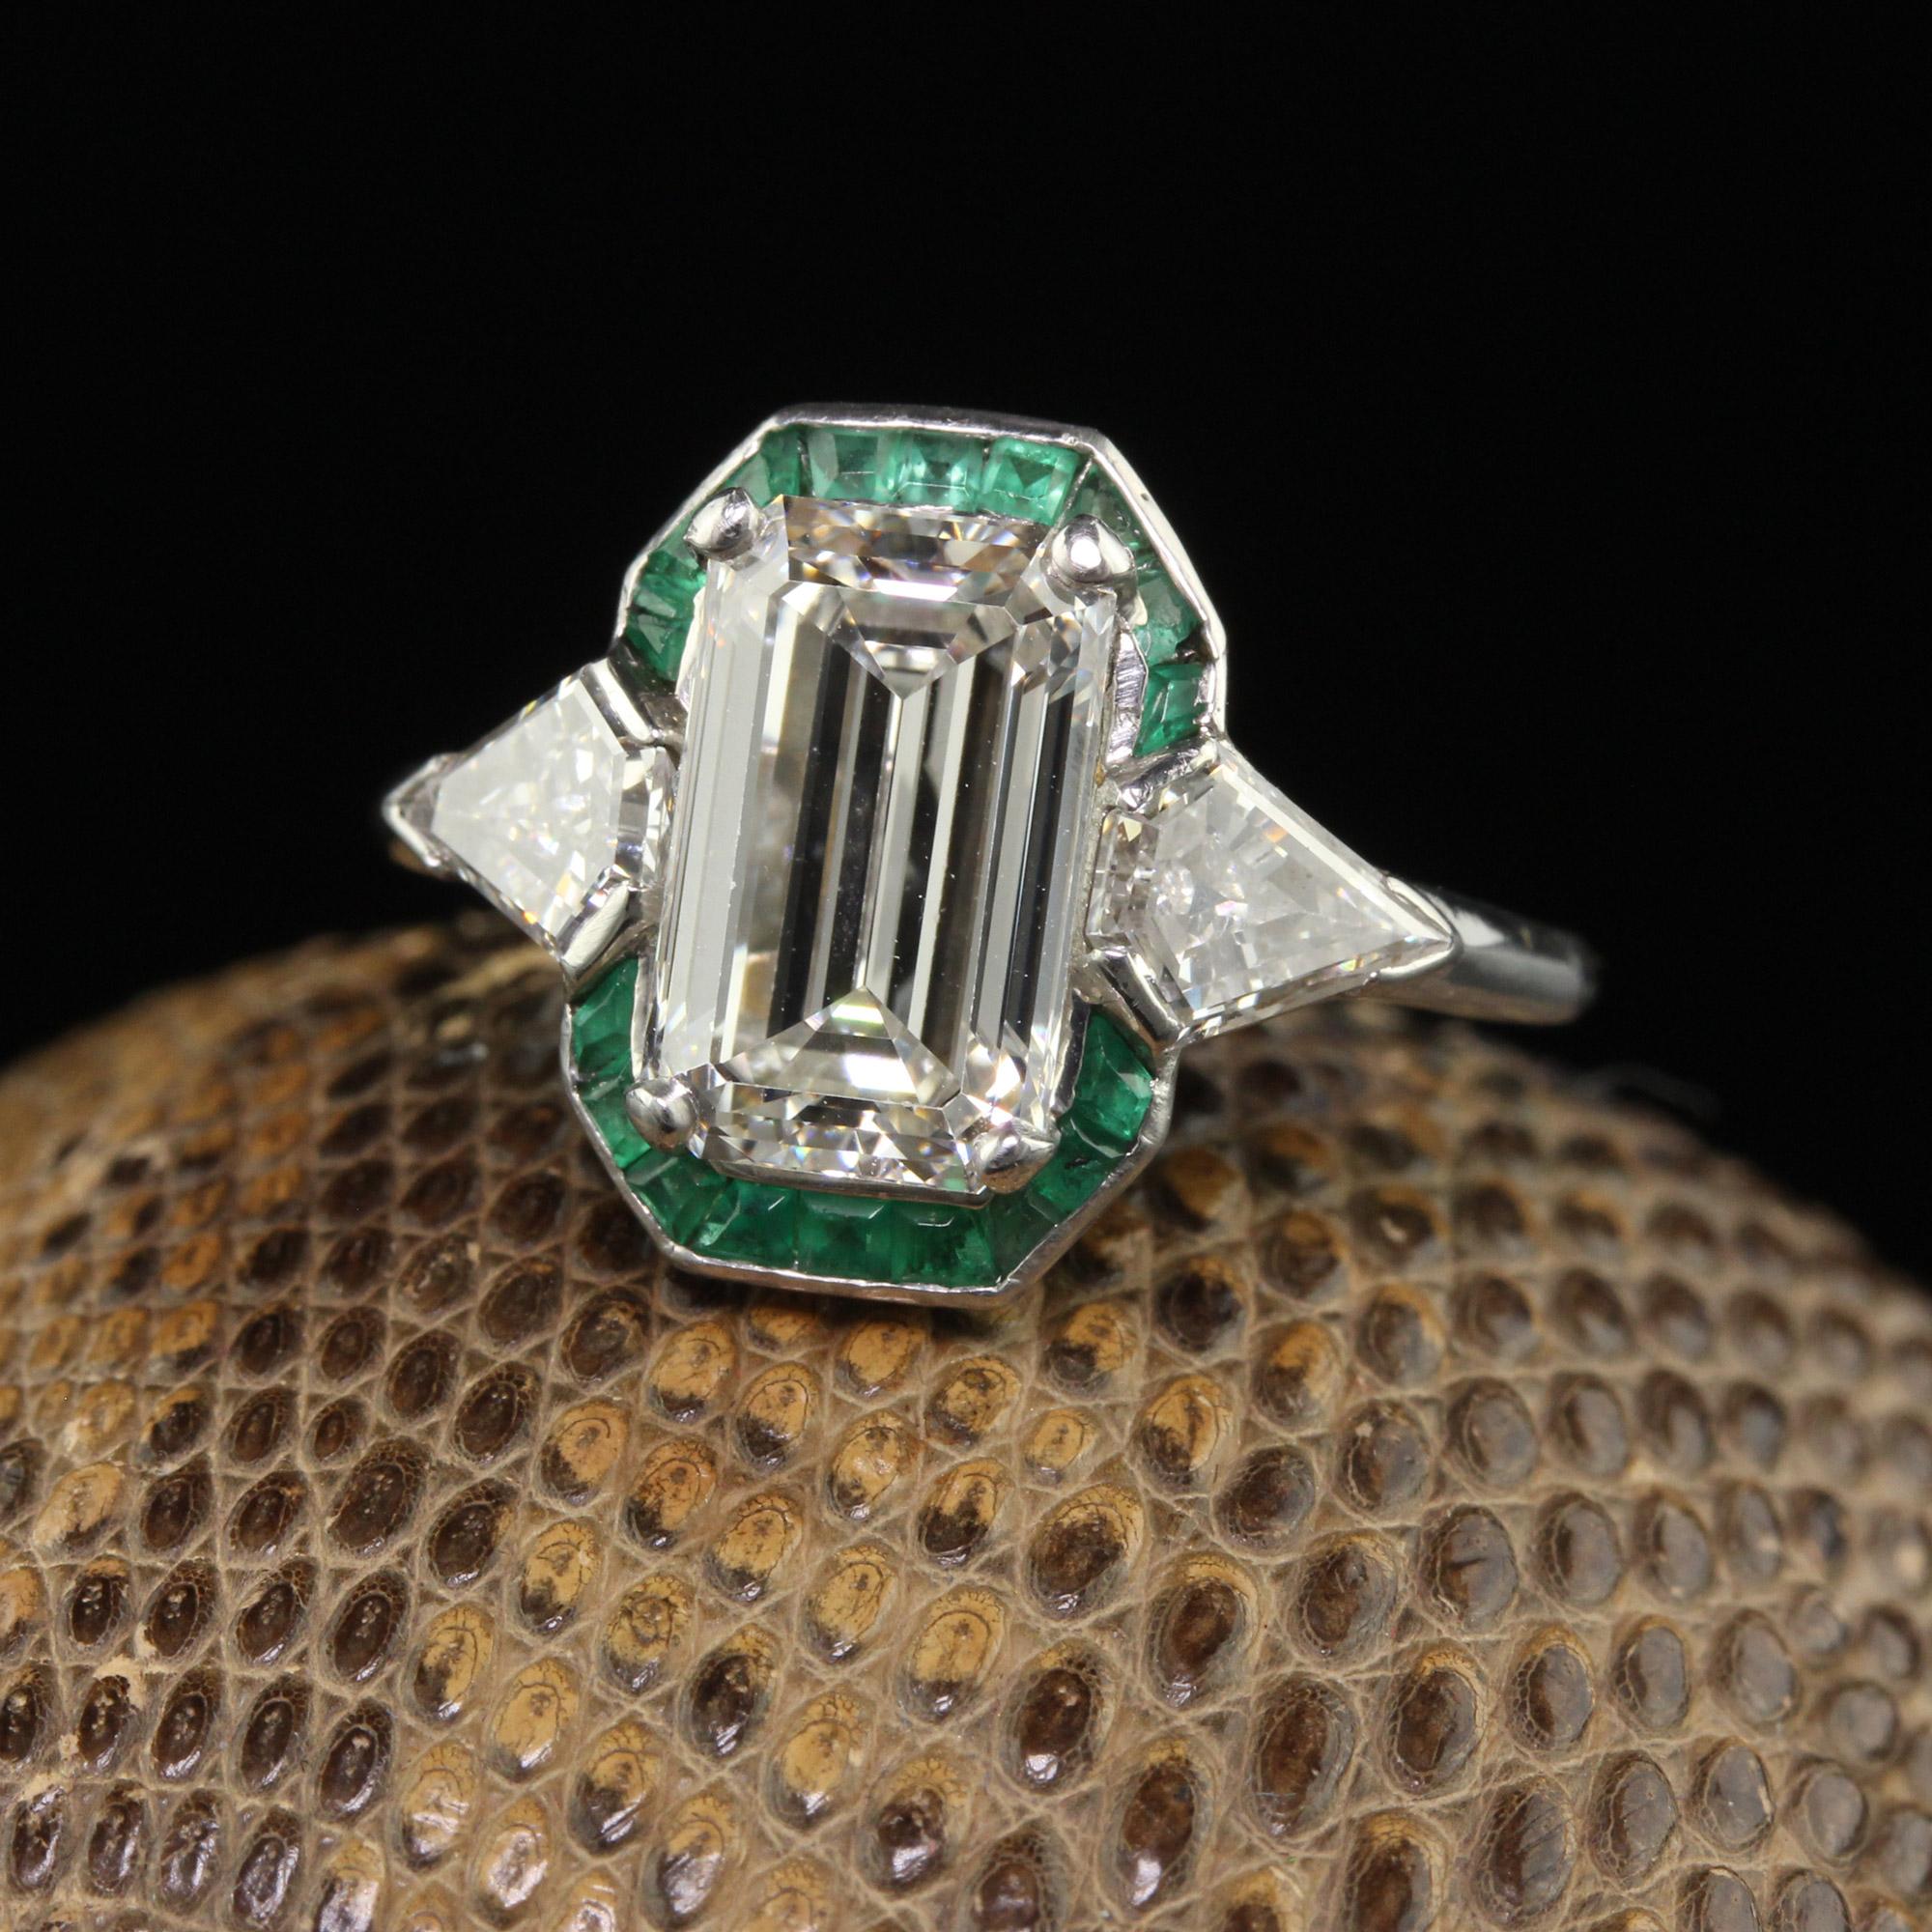 Beautiful Antique Art Deco Platinum Emerald Cut Diamond Emerald Halo Engagement Ring - GIA. This unbelievable engagement ring is crafted in platinum. The center holds an emerald cut diamond that has a GIA report. The proportions of this beautiful